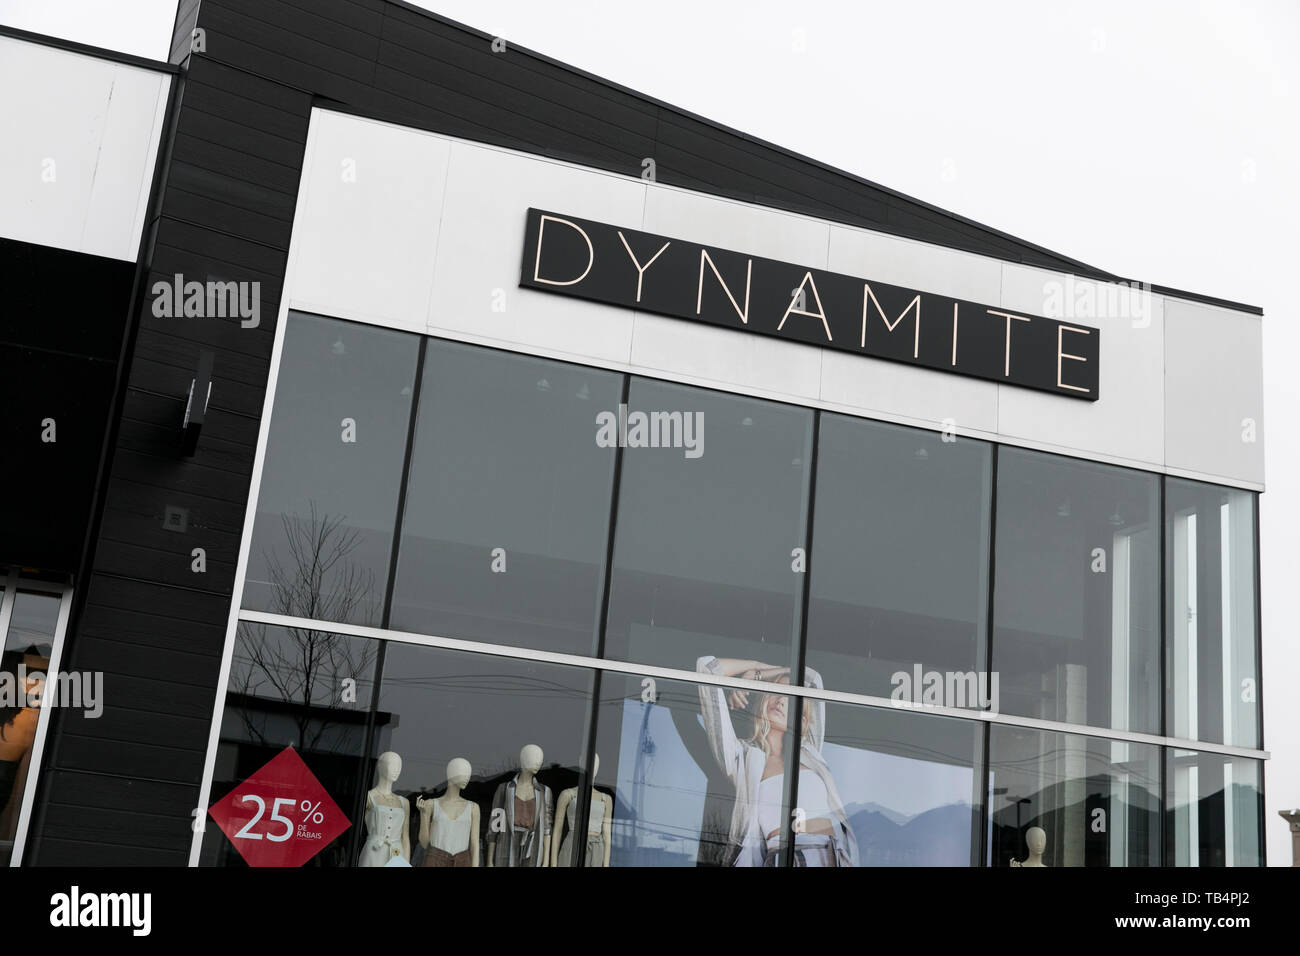 A logo sign outside of a Dynamite retail store location in Vaudreuil-Dorion, Quebec, Canada, on April 21, 2019. Stock Photo